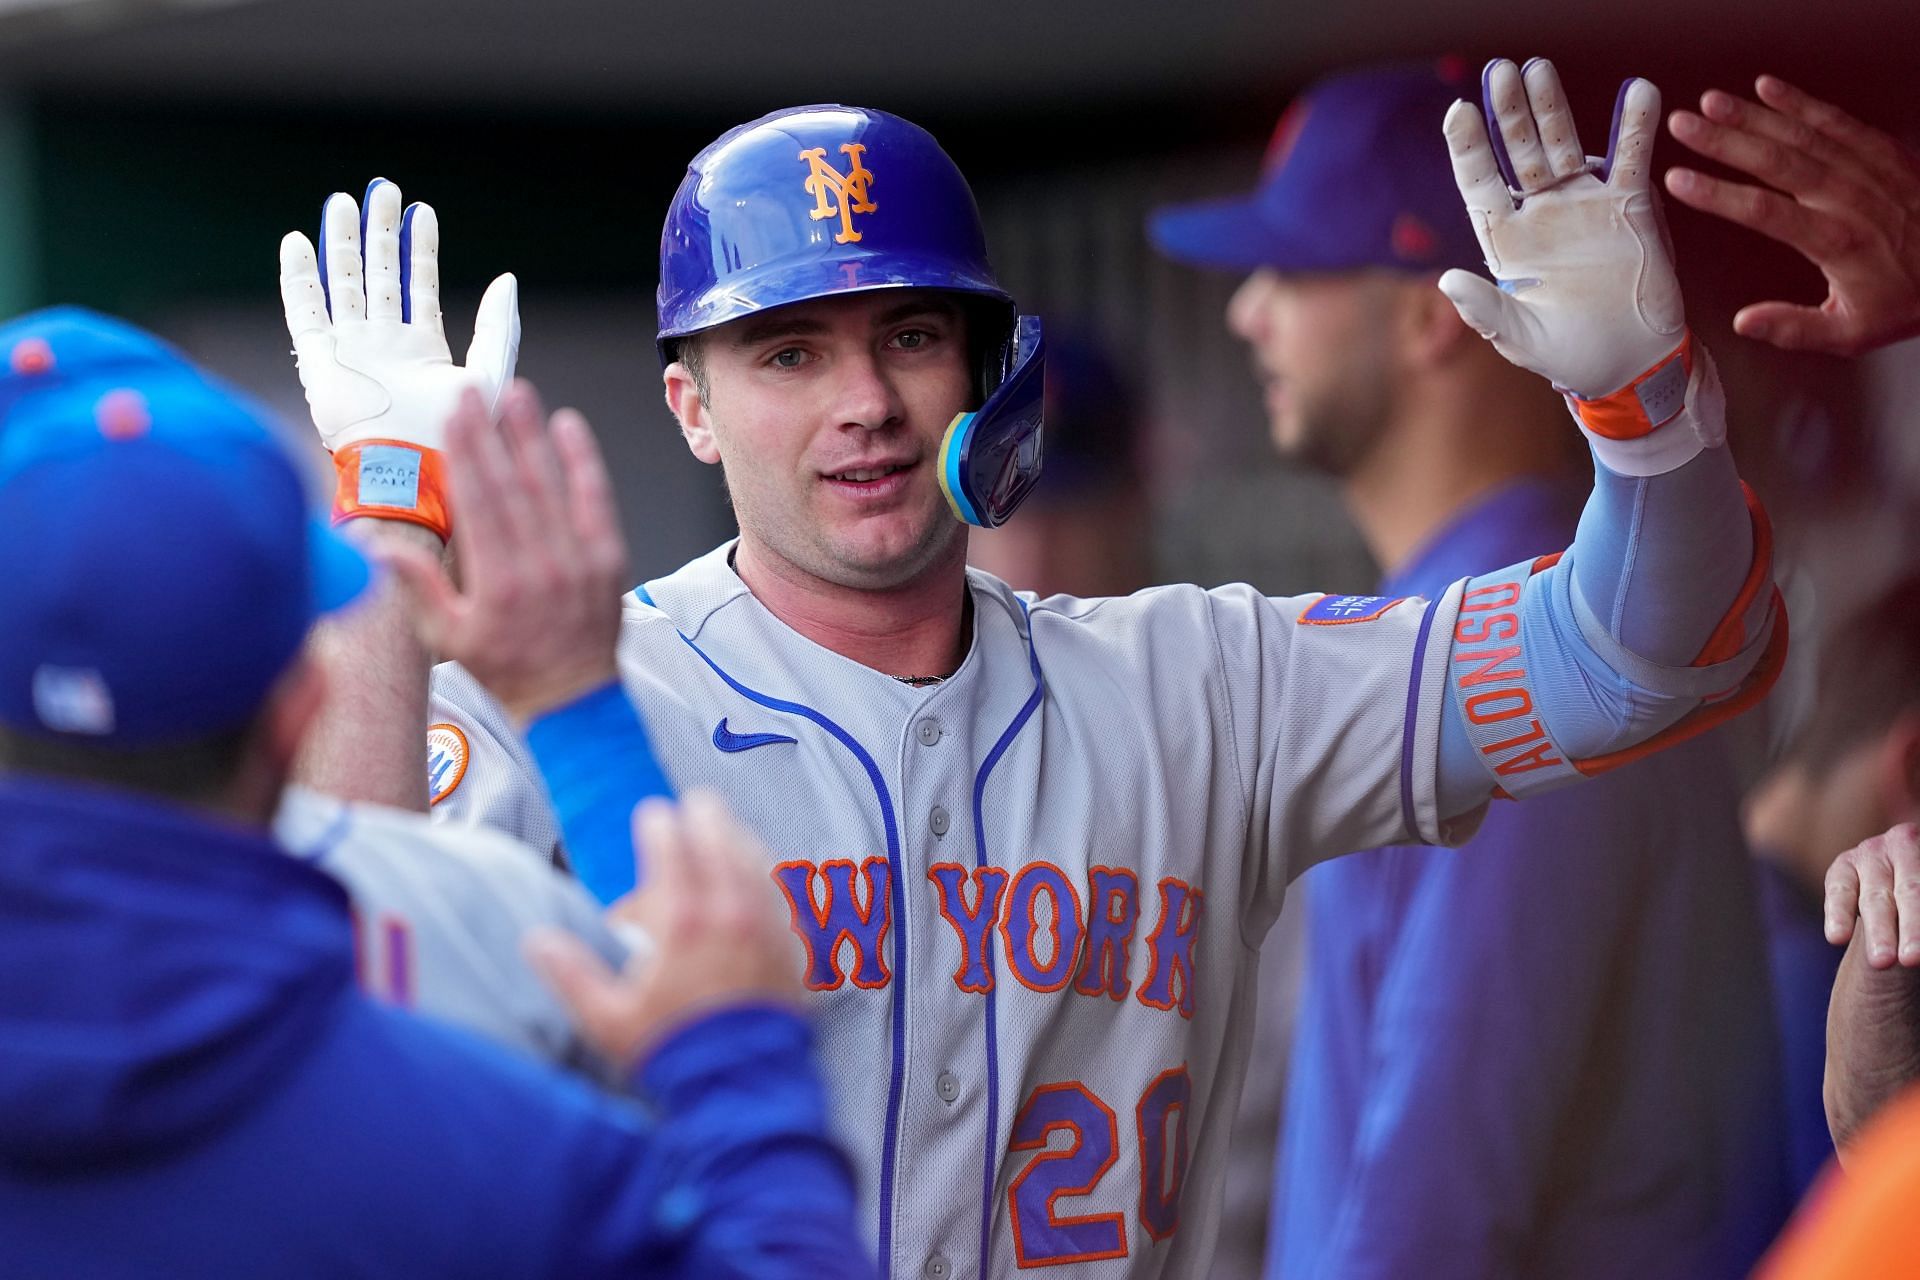 Pete Alonso of the New York Mets celebrates with teammates after a homer against the Cincinnati Reds.